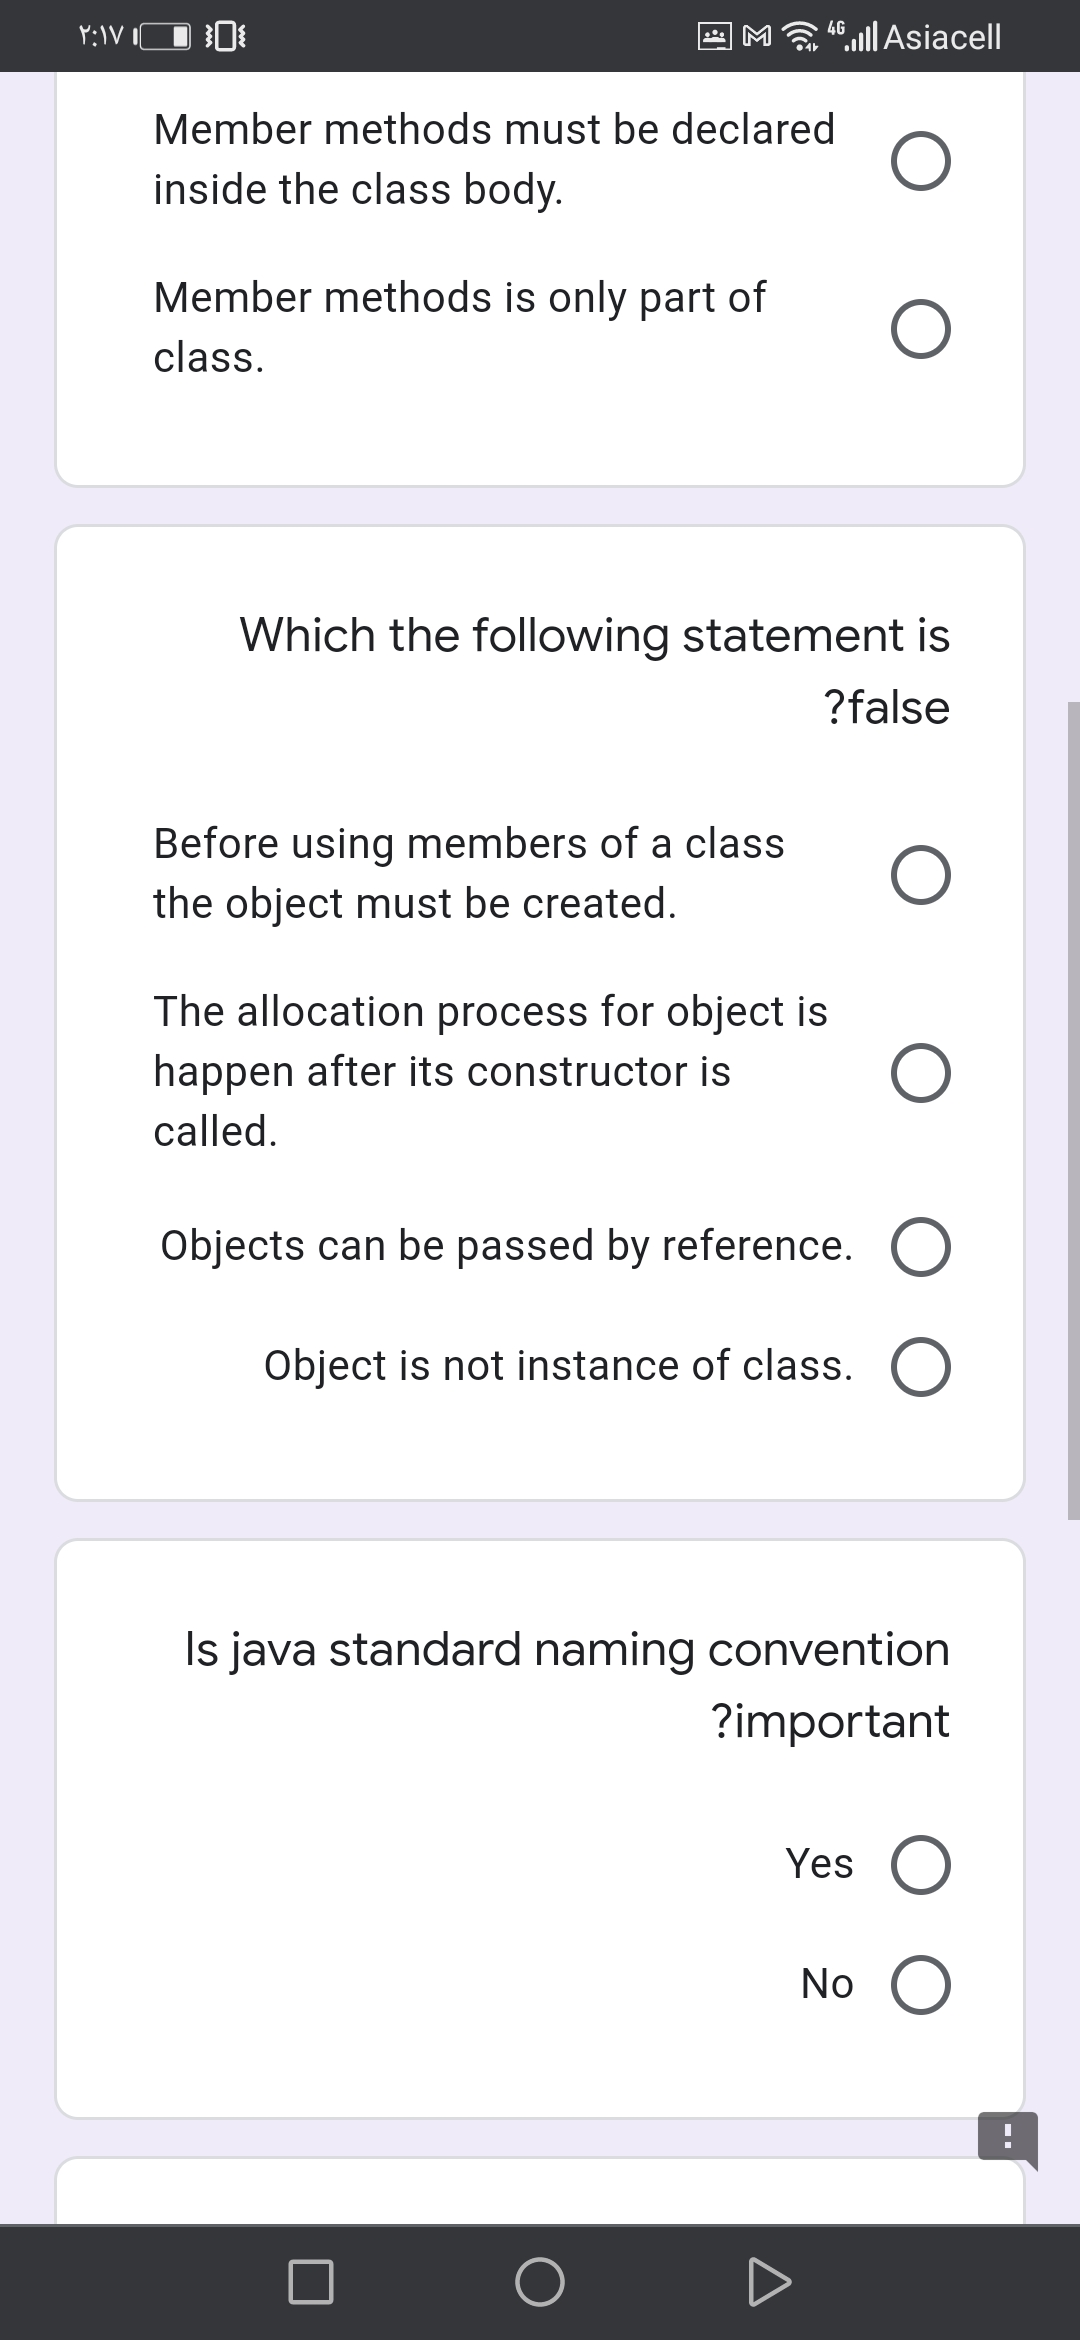 M 4llAsiacell
Member methods must be declared
inside the class body.
Member methods is only part of
class.
Which the following statement is
?false
Before using members of a class
the object must be created.
The allocation process for object is
happen after its constructor is
called.
Objects can be passed by reference.
Object is not instance of class. O
Is java standard naming convention
?important
Yes
No
